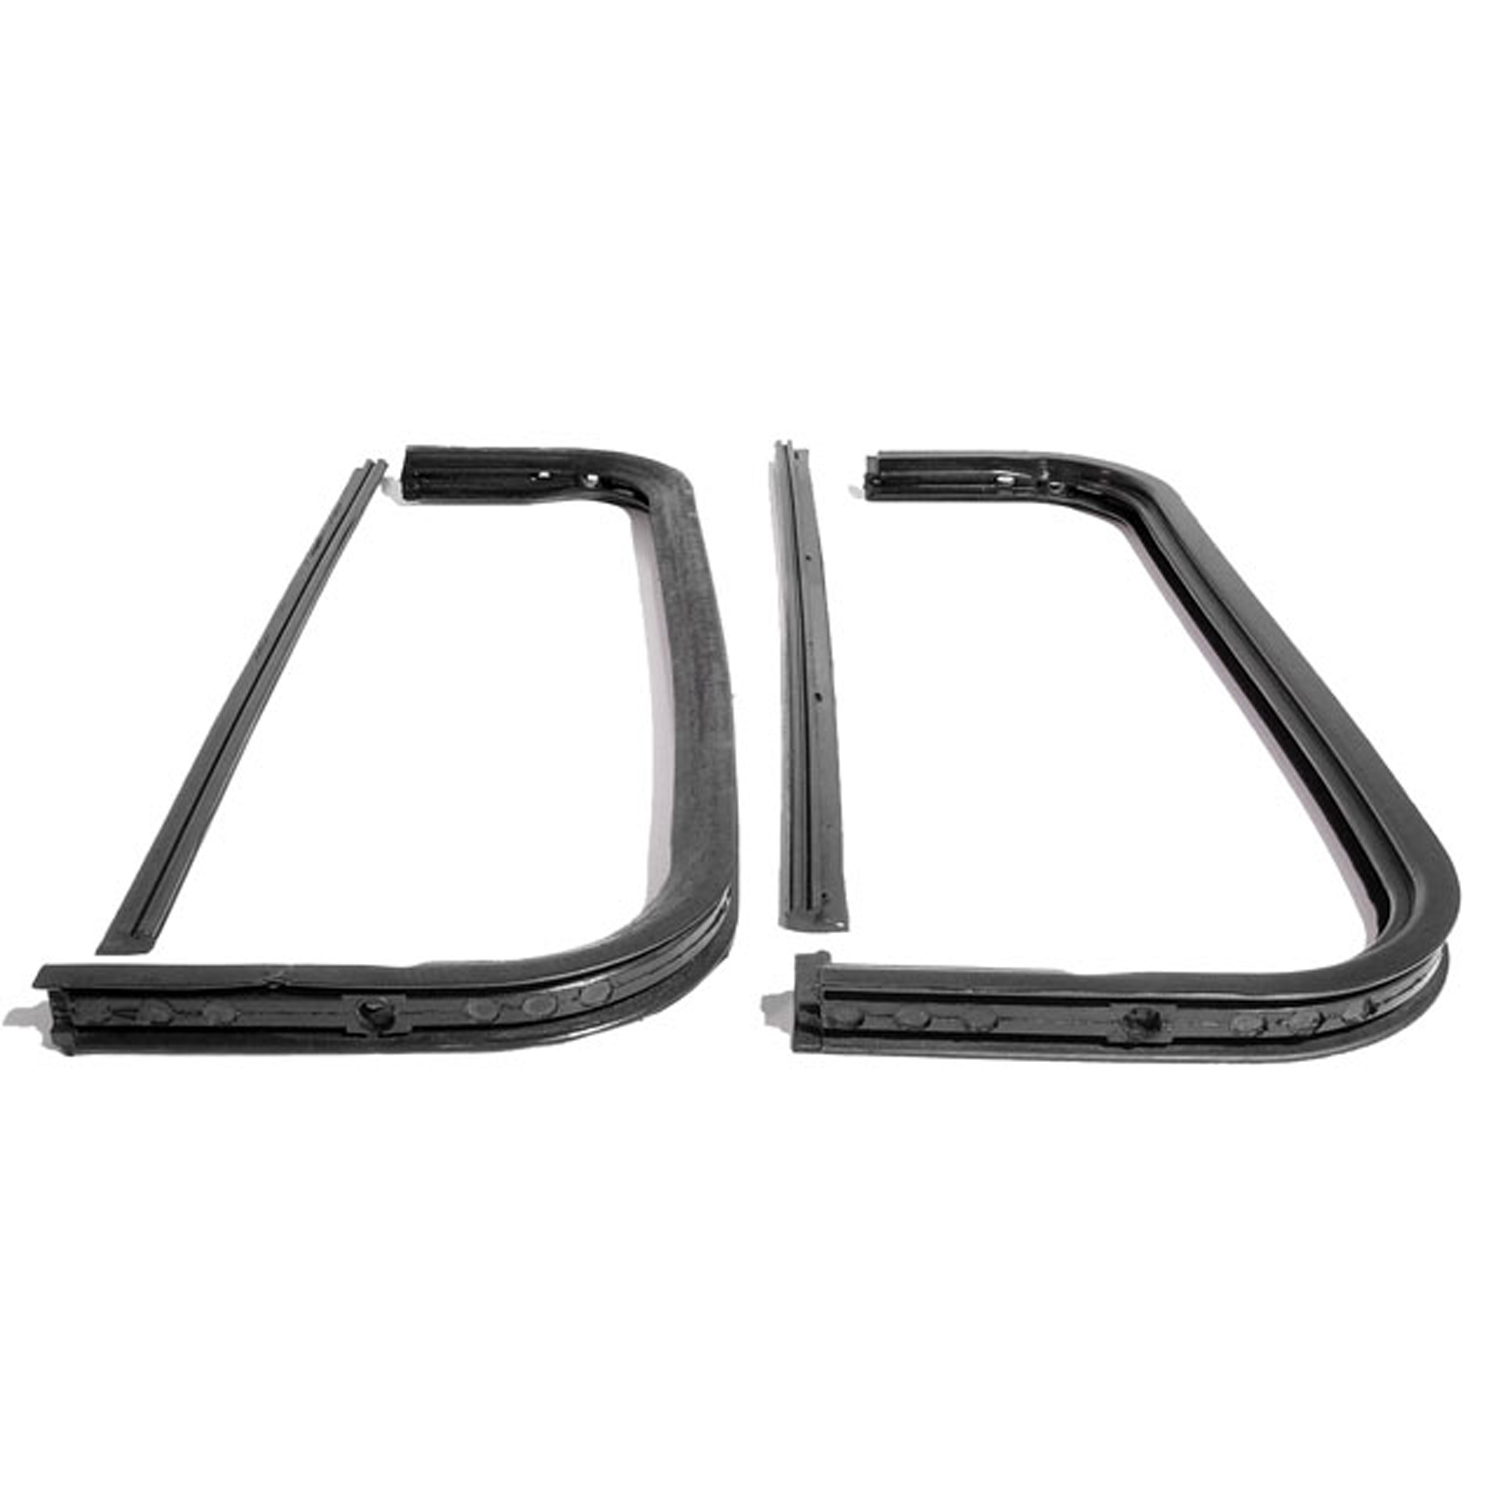 1963 Chevrolet K20 Pickup Vent Window Seals with Division Post Seals-WR 1900